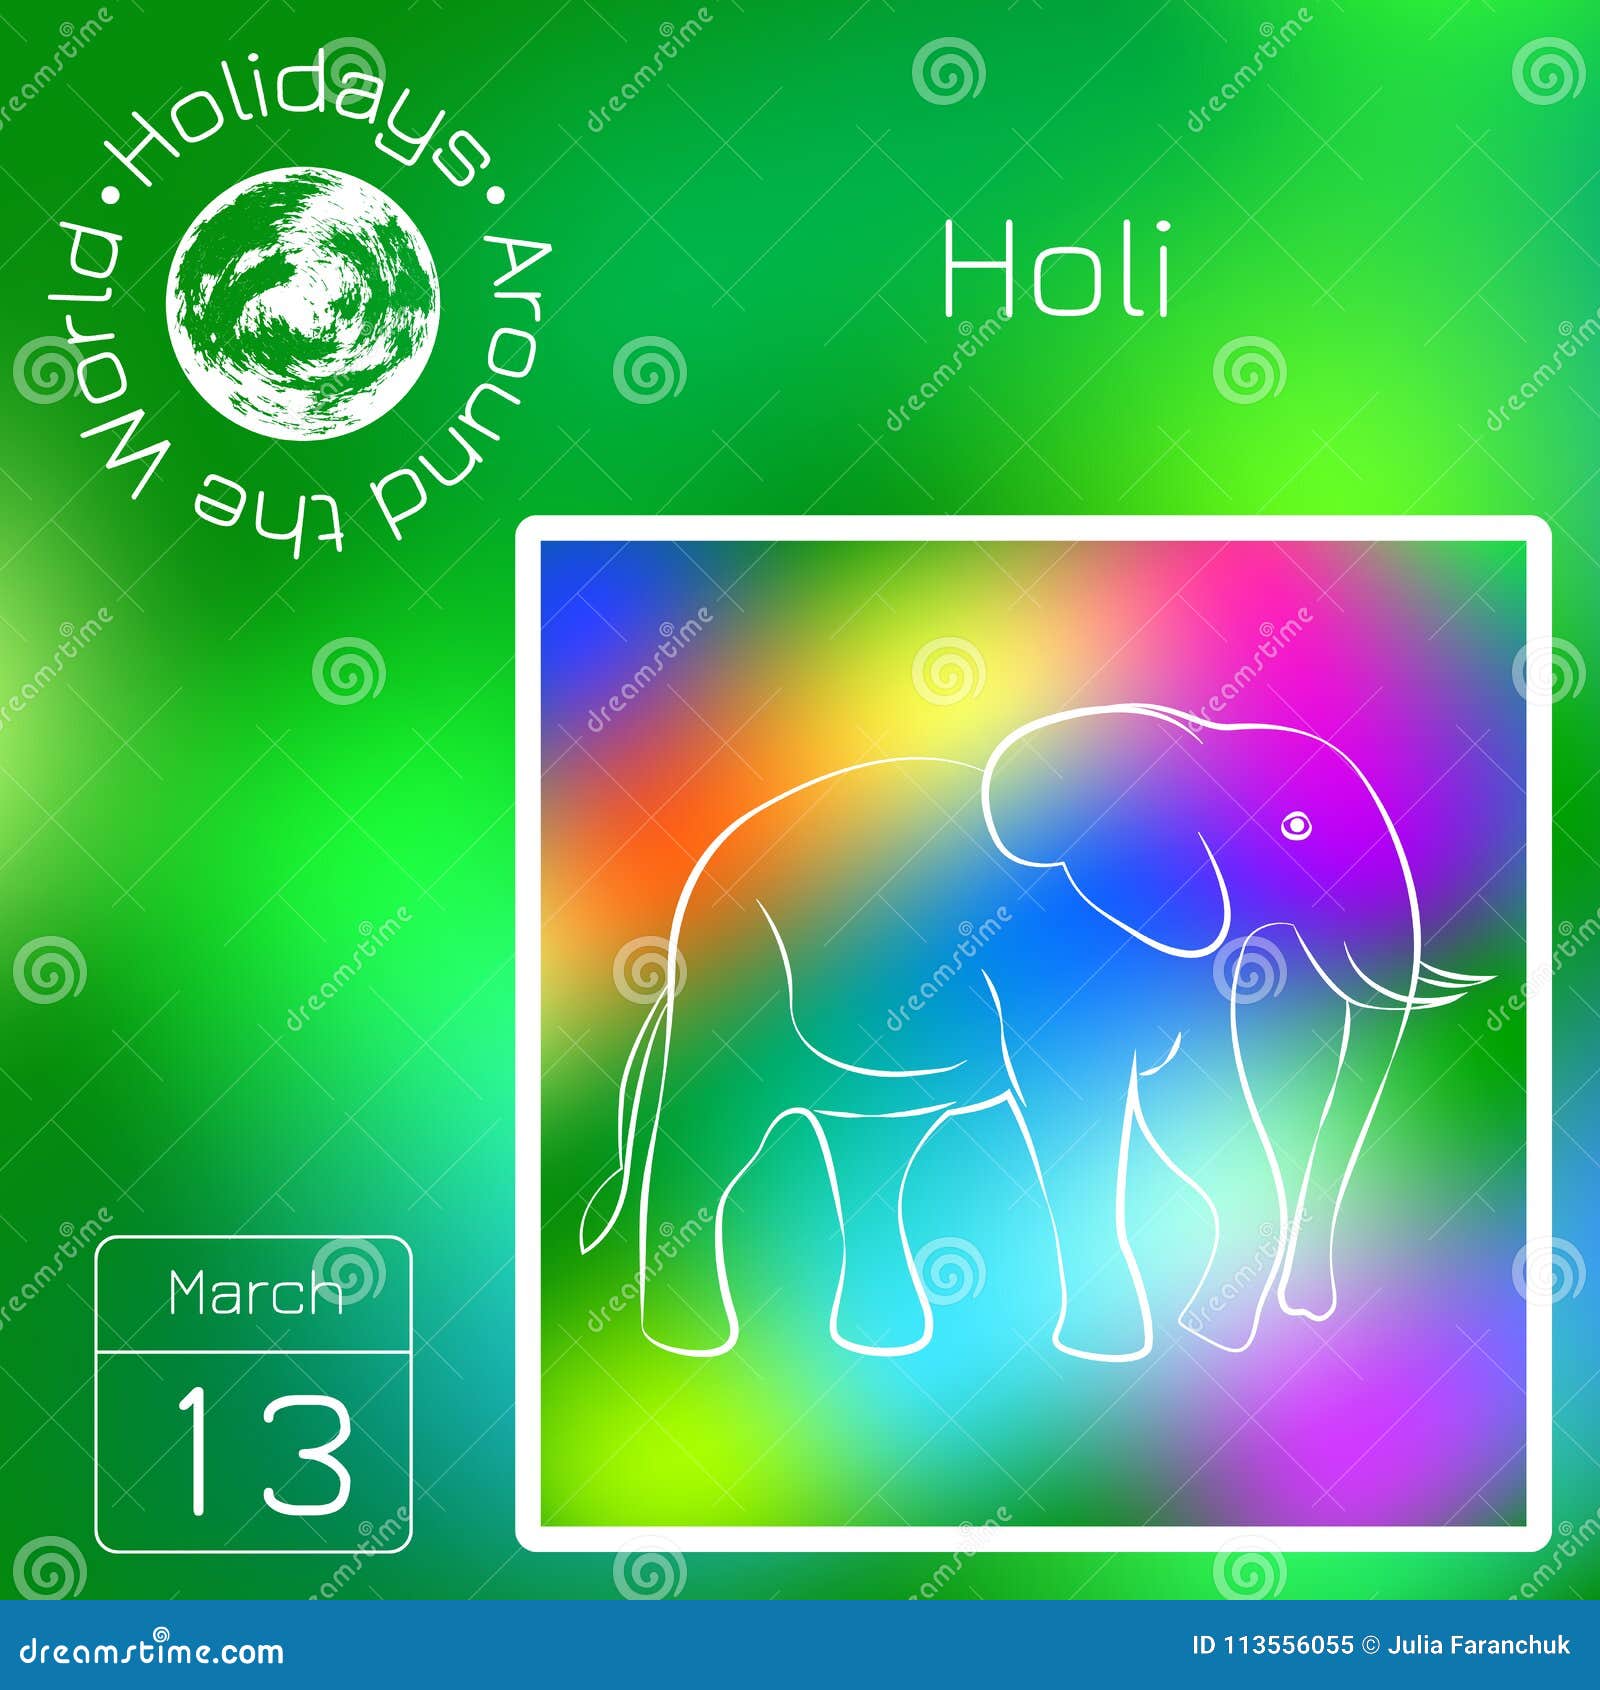 Series Calendar. Holidays Around the World. Event of Each Day of the Year.  Holi Indian Holiday Stock Illustration - Illustration of websites,  background: 113556055